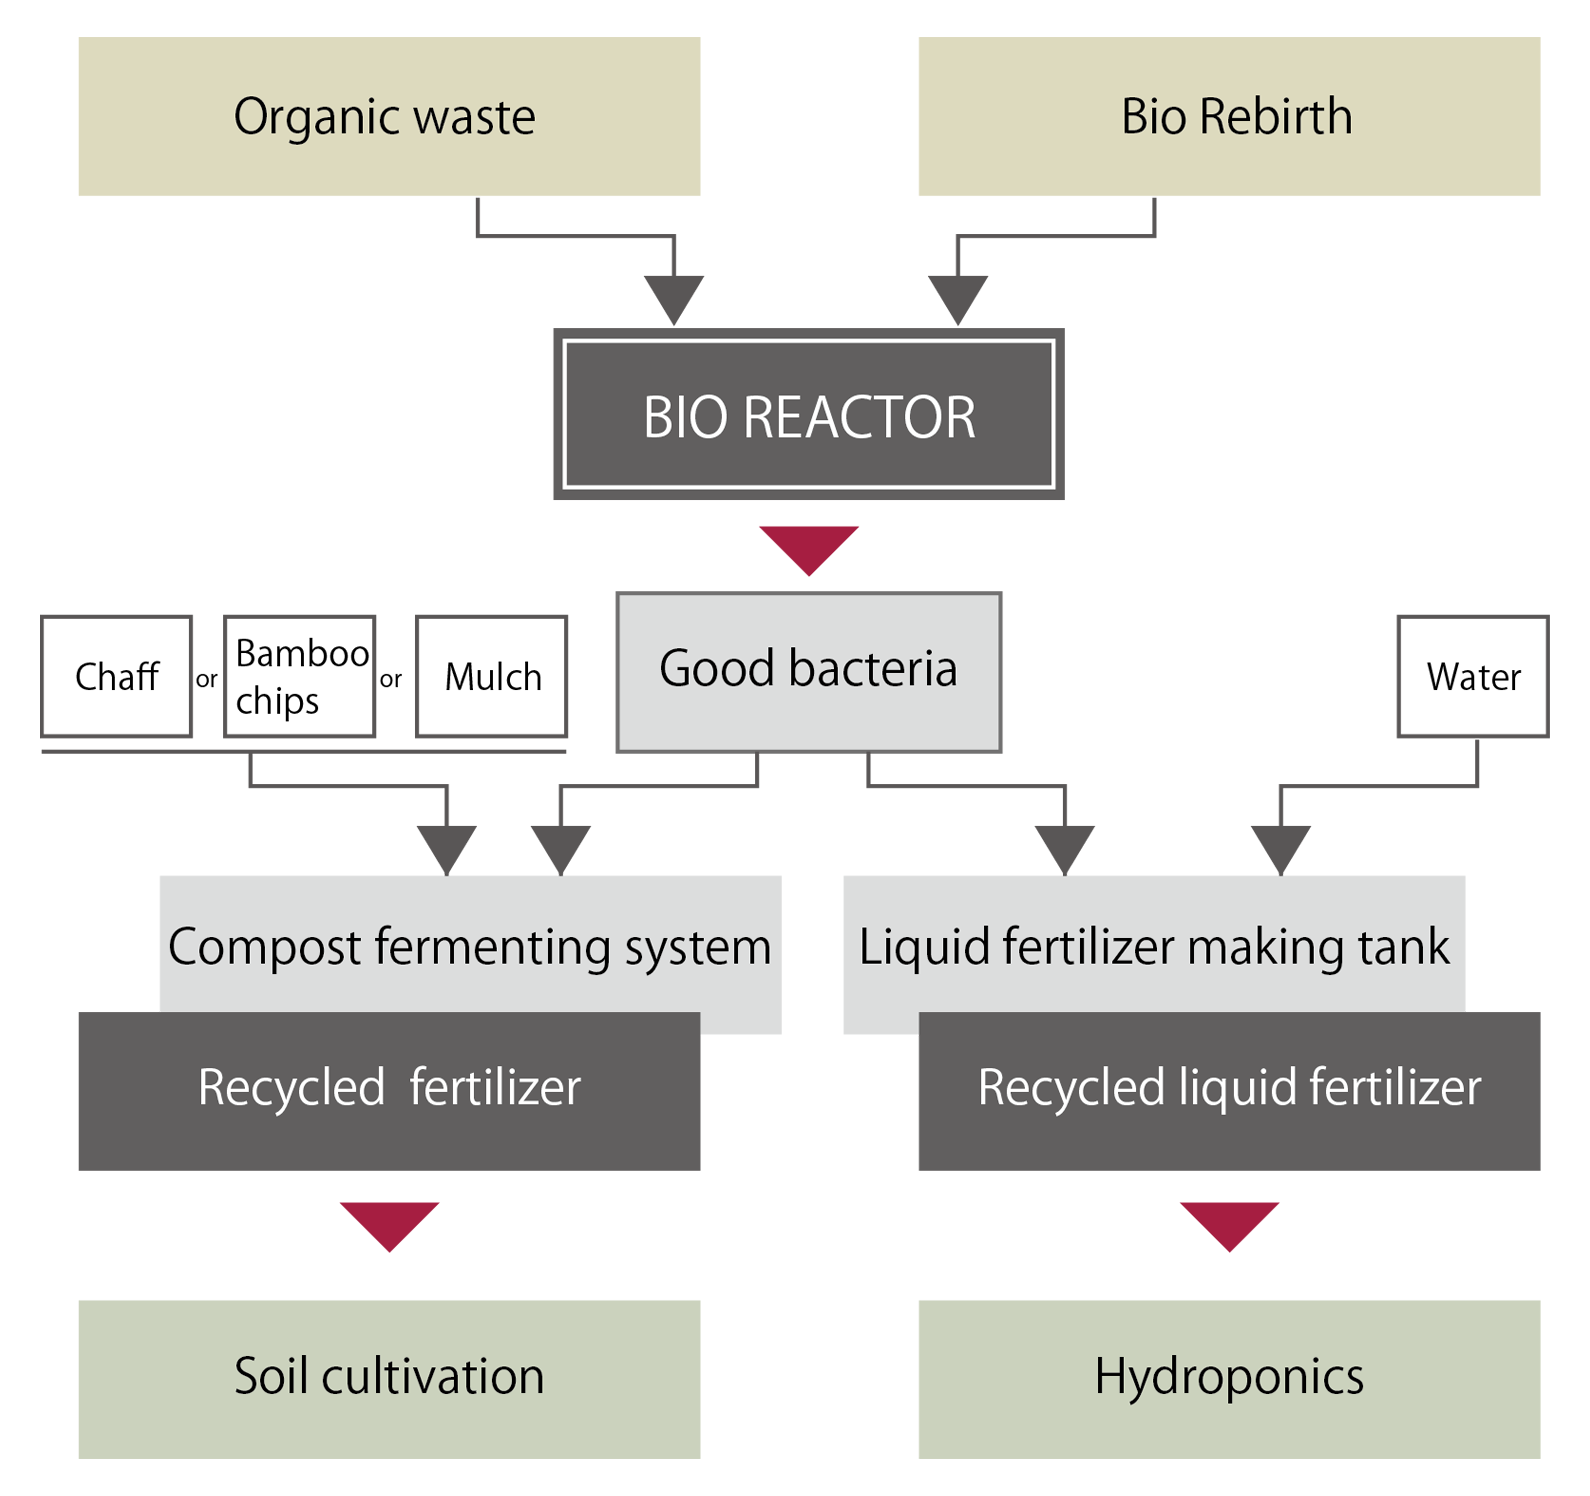 Process of recycling organic waste